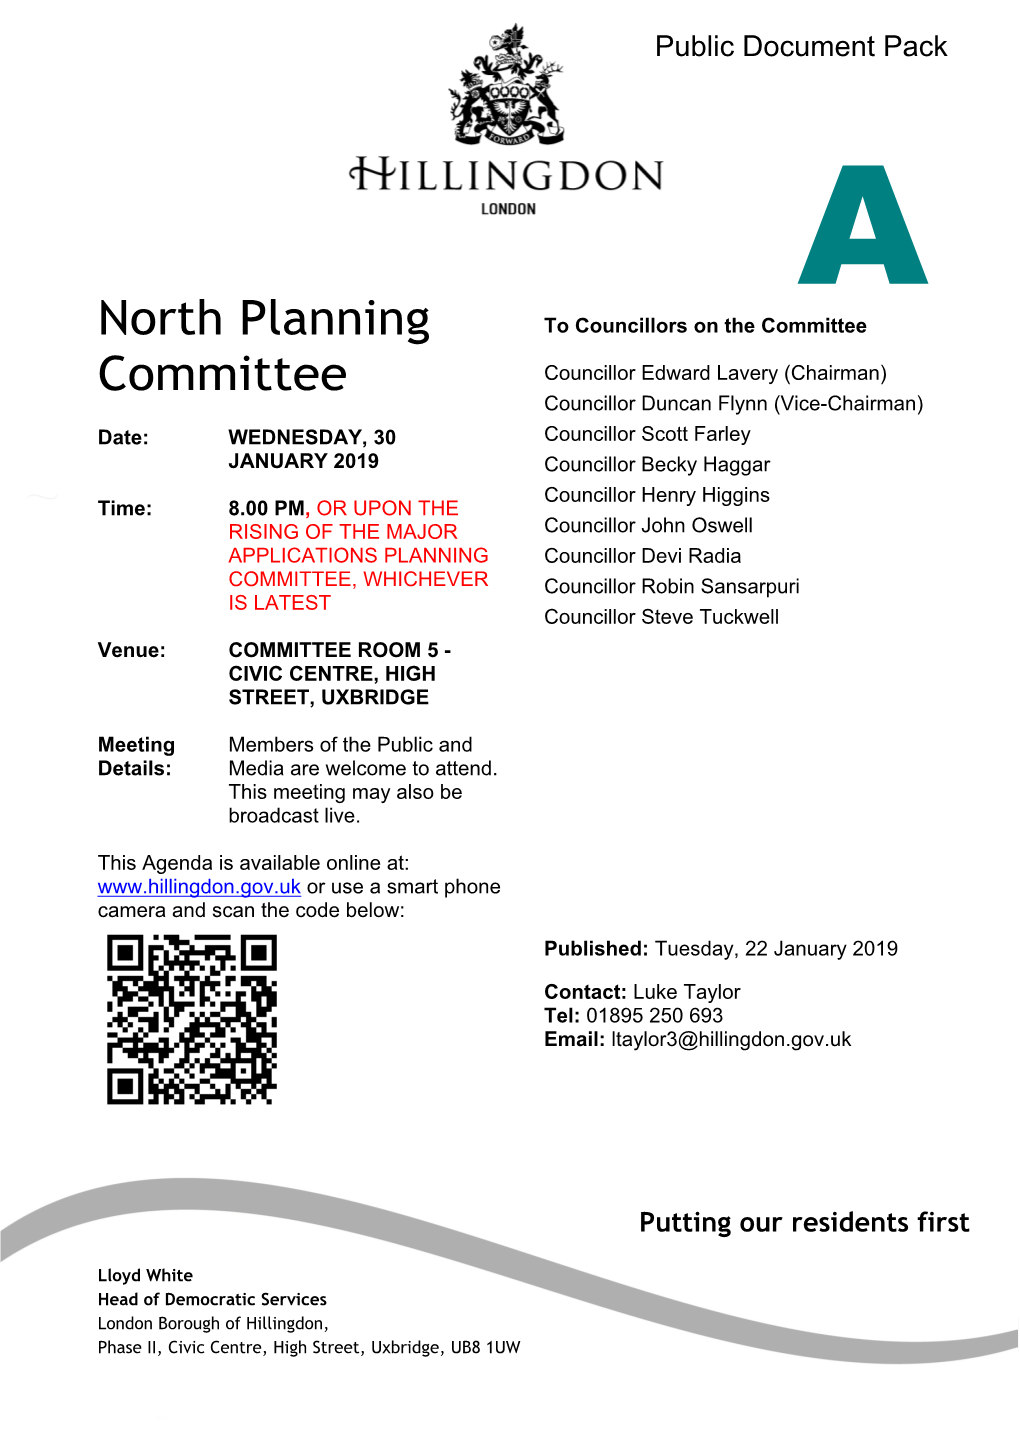 (Public Pack)Agenda Document for North Planning Committee, 30/01